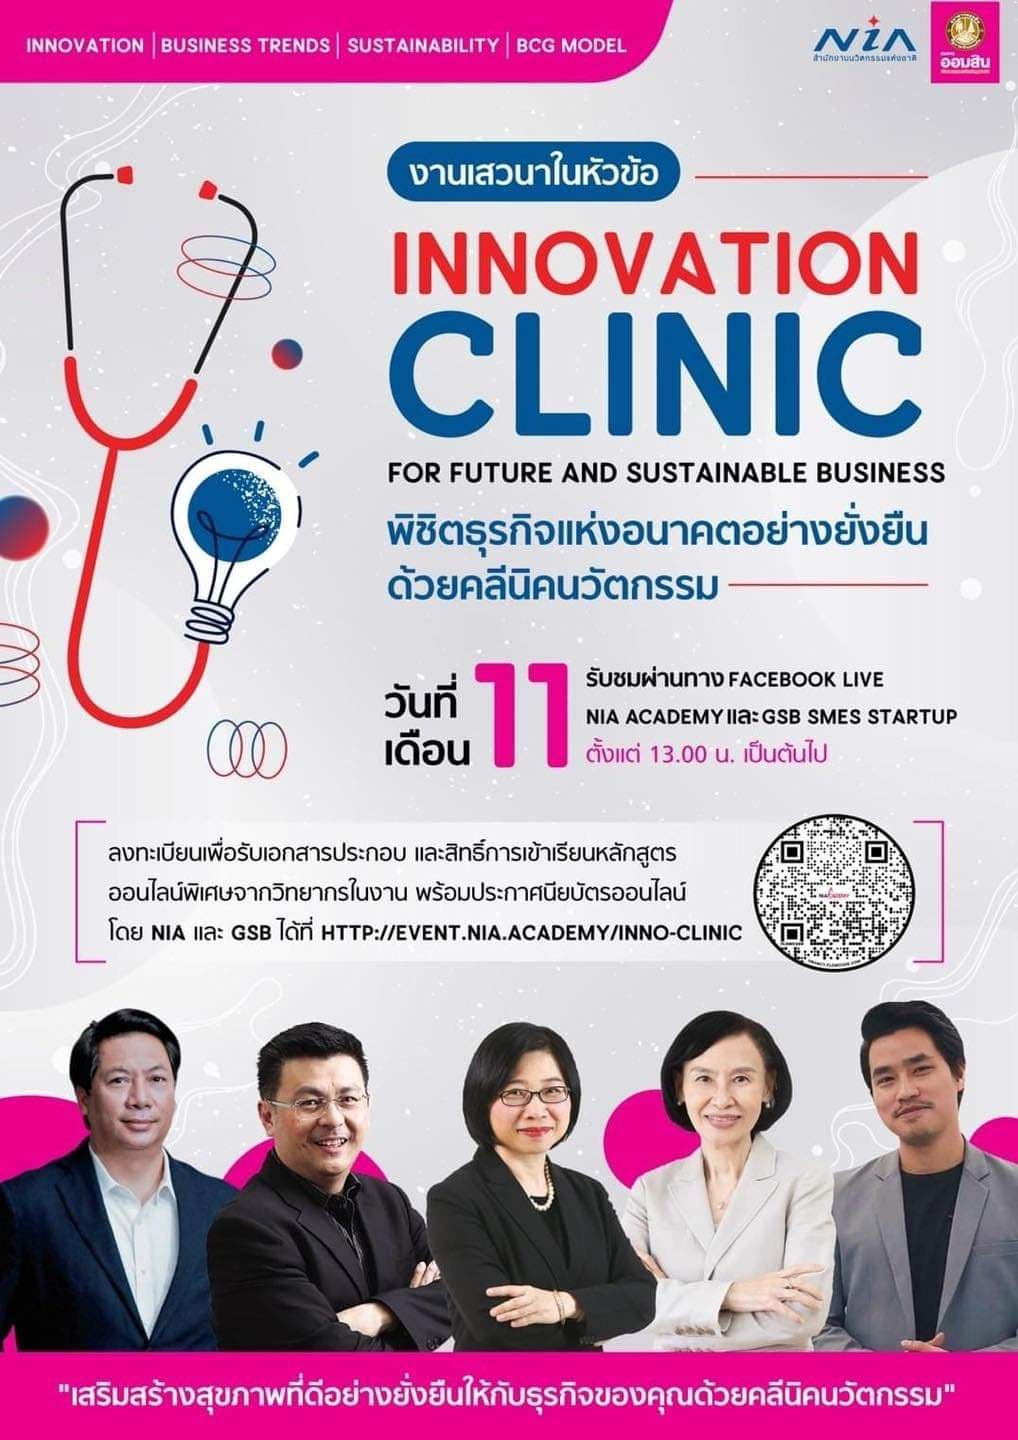 Innovation Clinic For Future and Sustainable Business